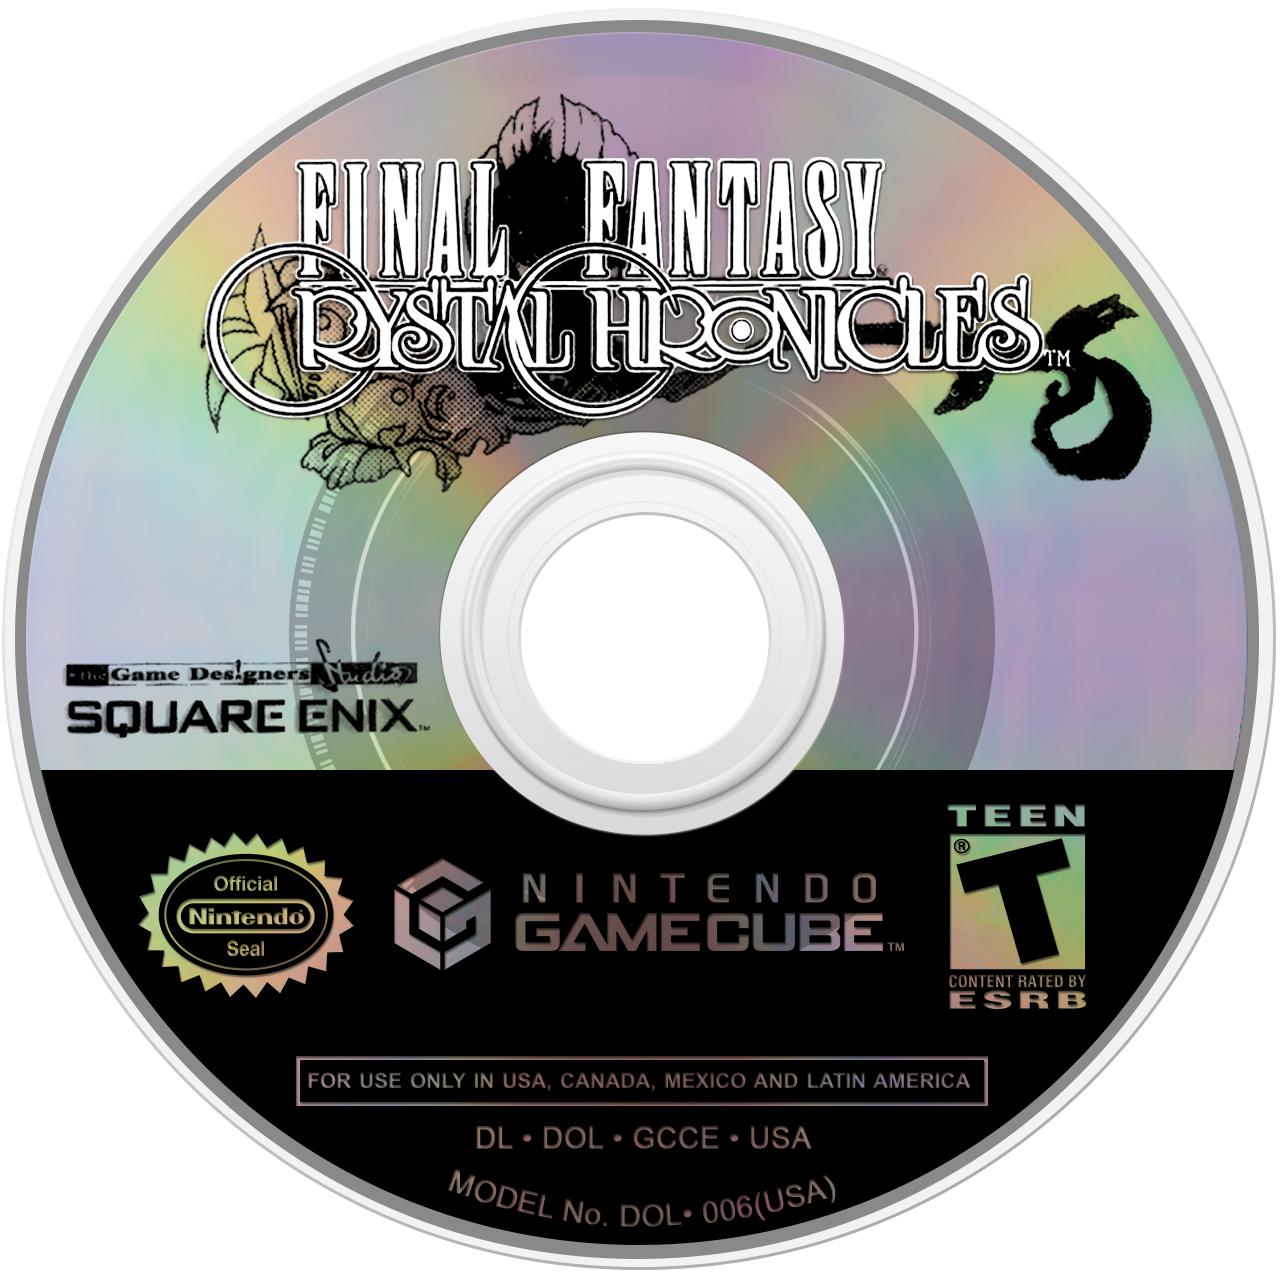 Final Fantasy: Crystal Chronicles - GameCube Game - YourGamingShop.com - Buy, Sell, Trade Video Games Online. 120 Day Warranty. Satisfaction Guaranteed.